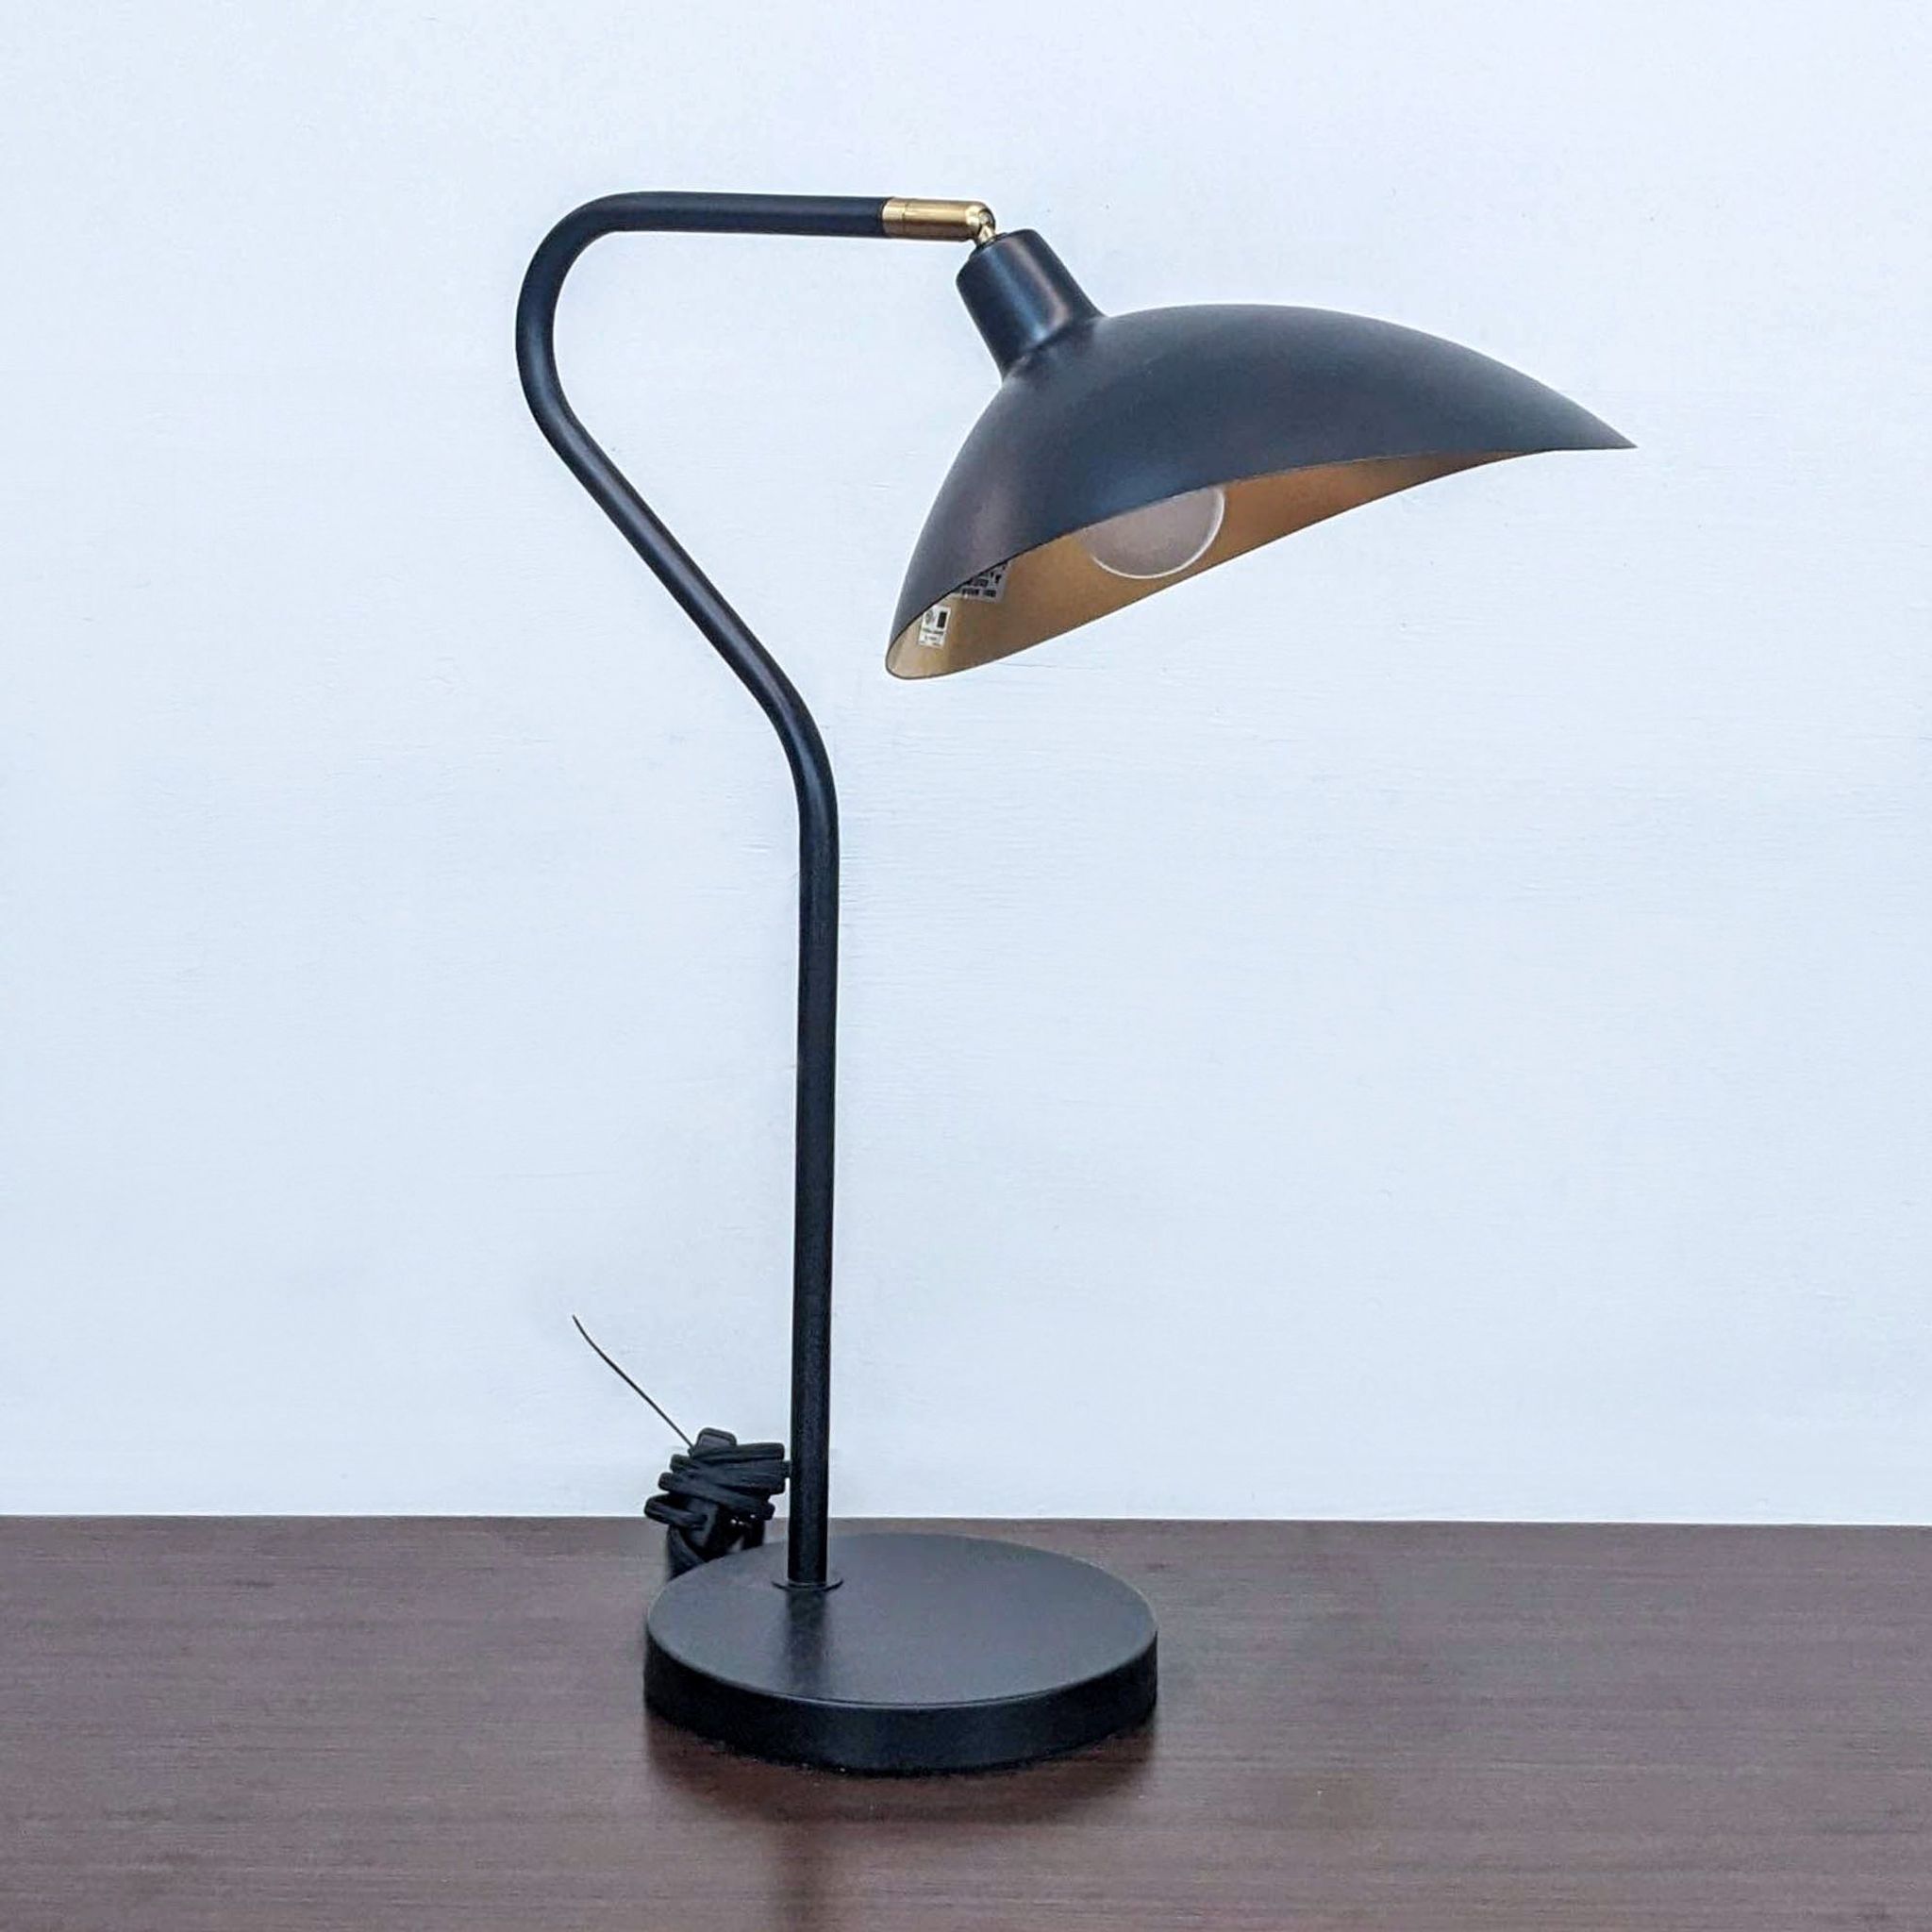 Safavieh mid-century style adjustable table lamp, black with gold accents, off-state on wooden surface.